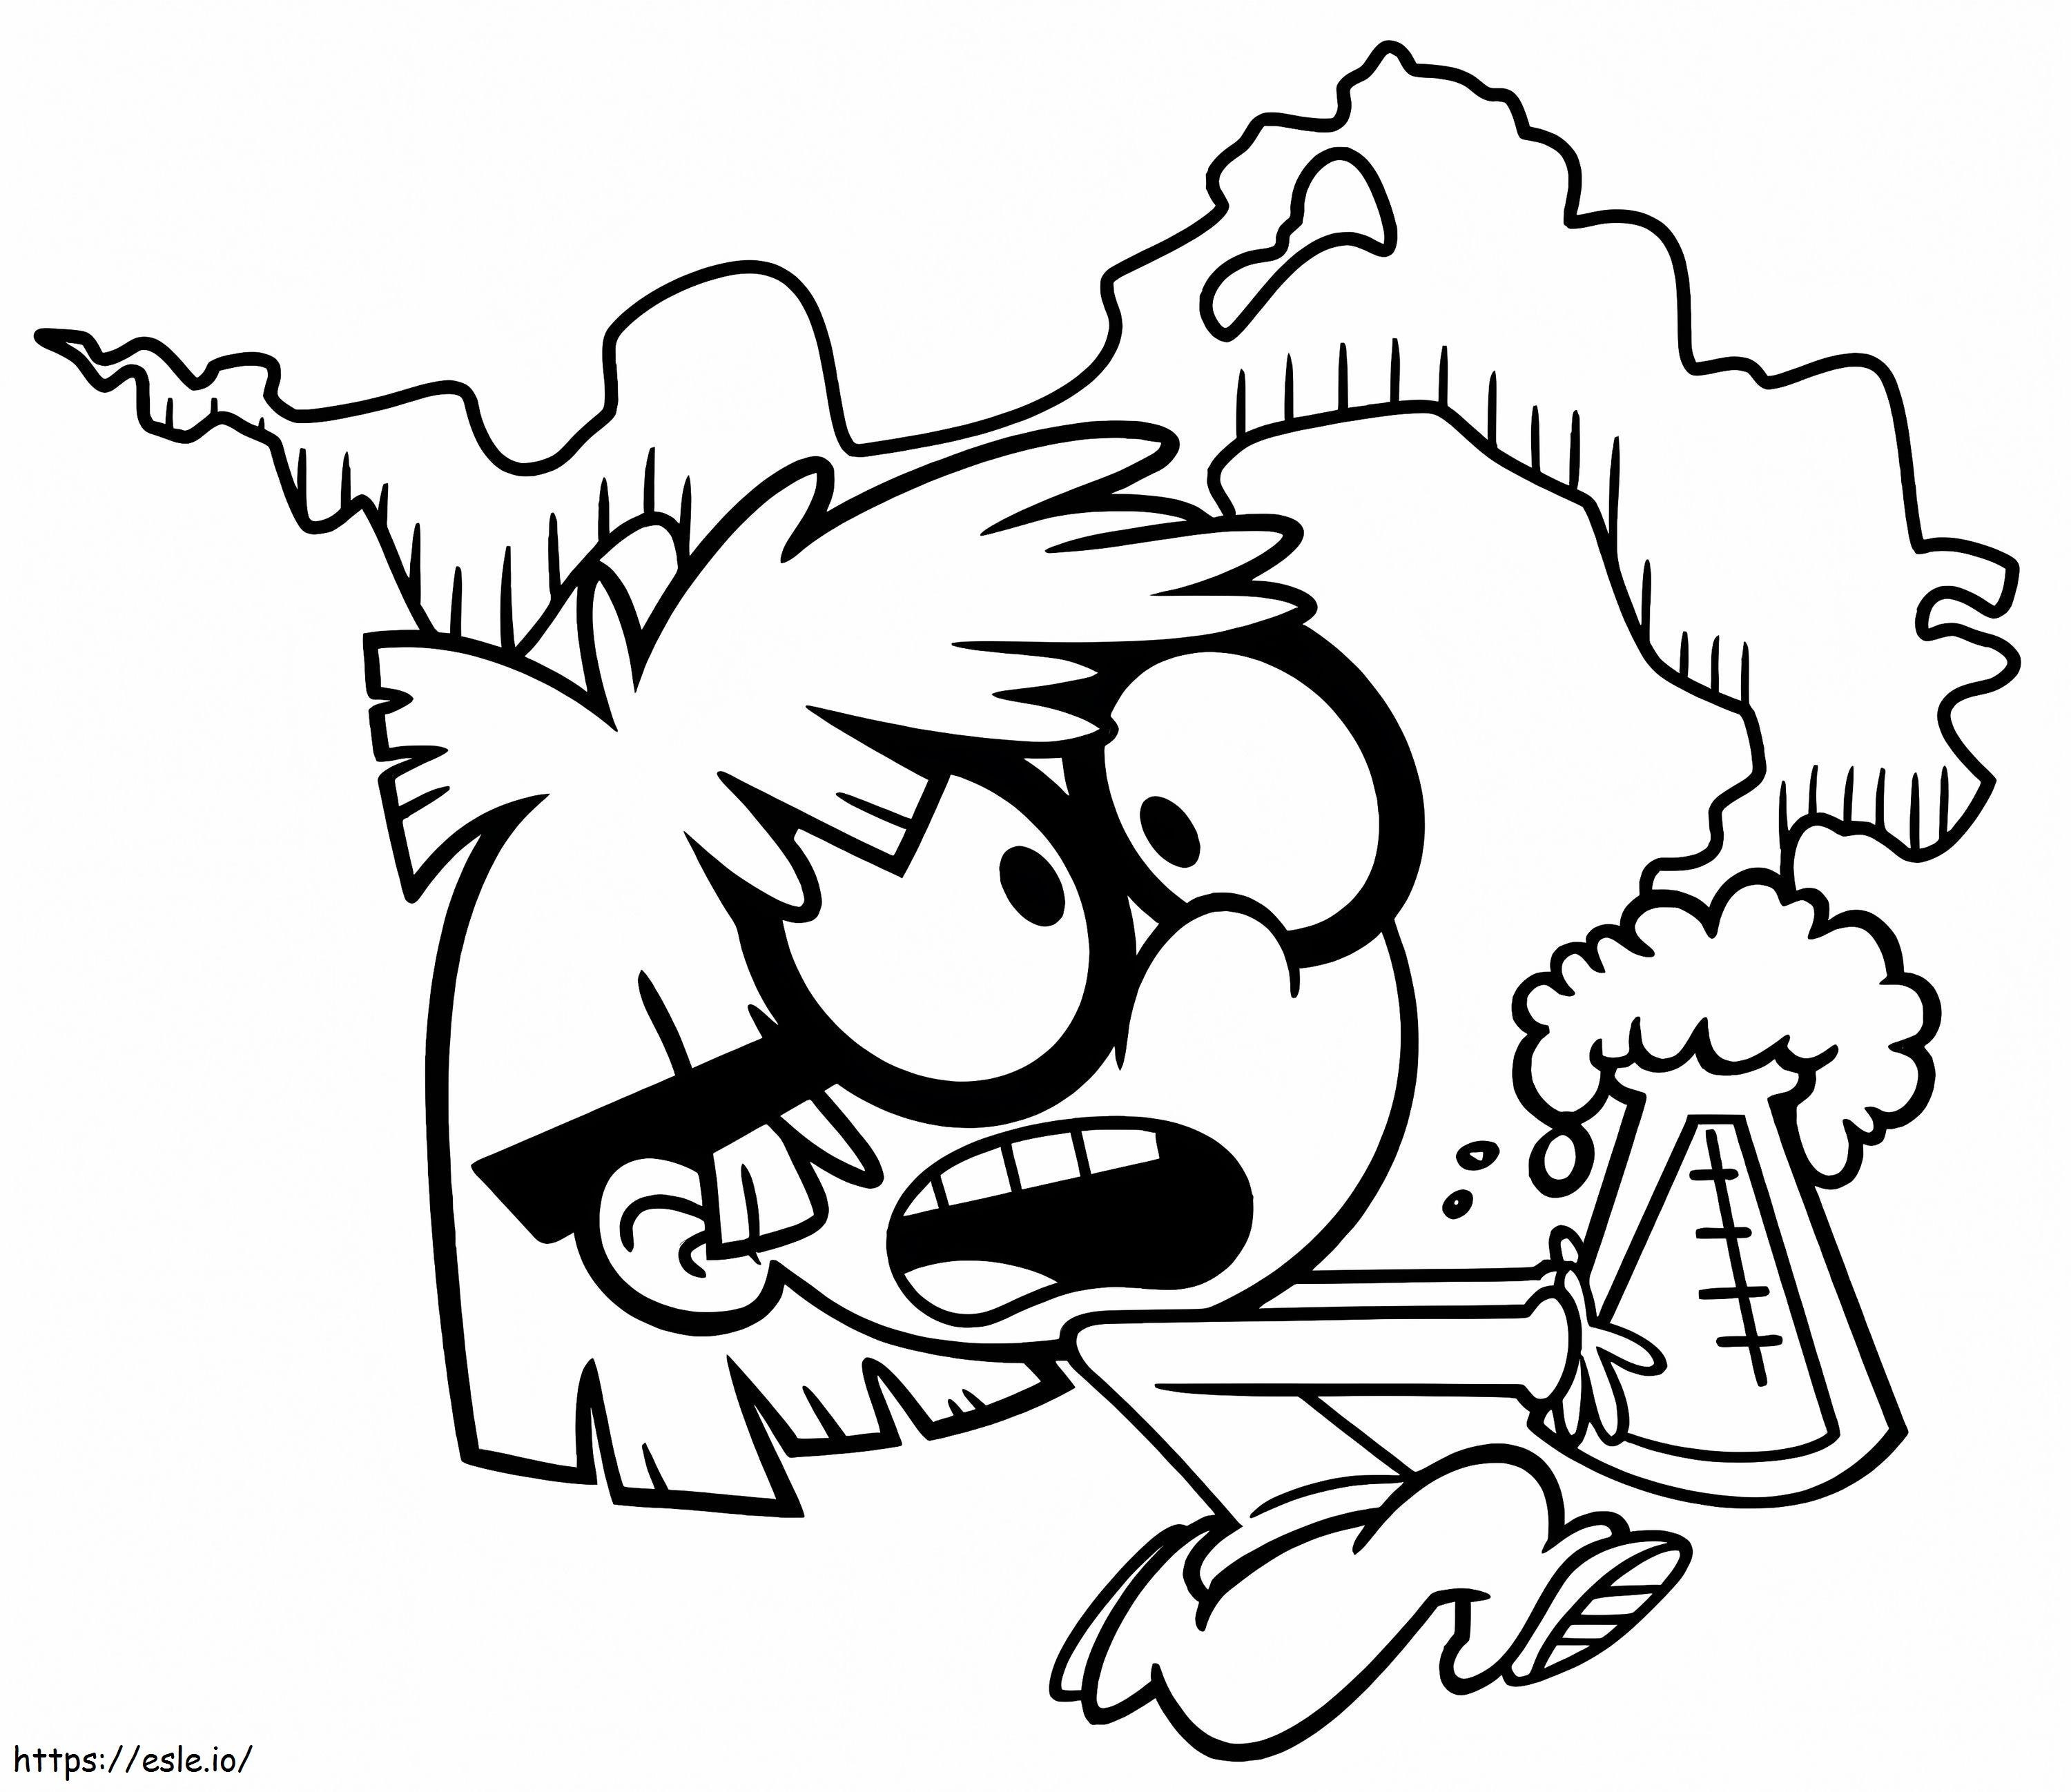 Smooth Loud House coloring page